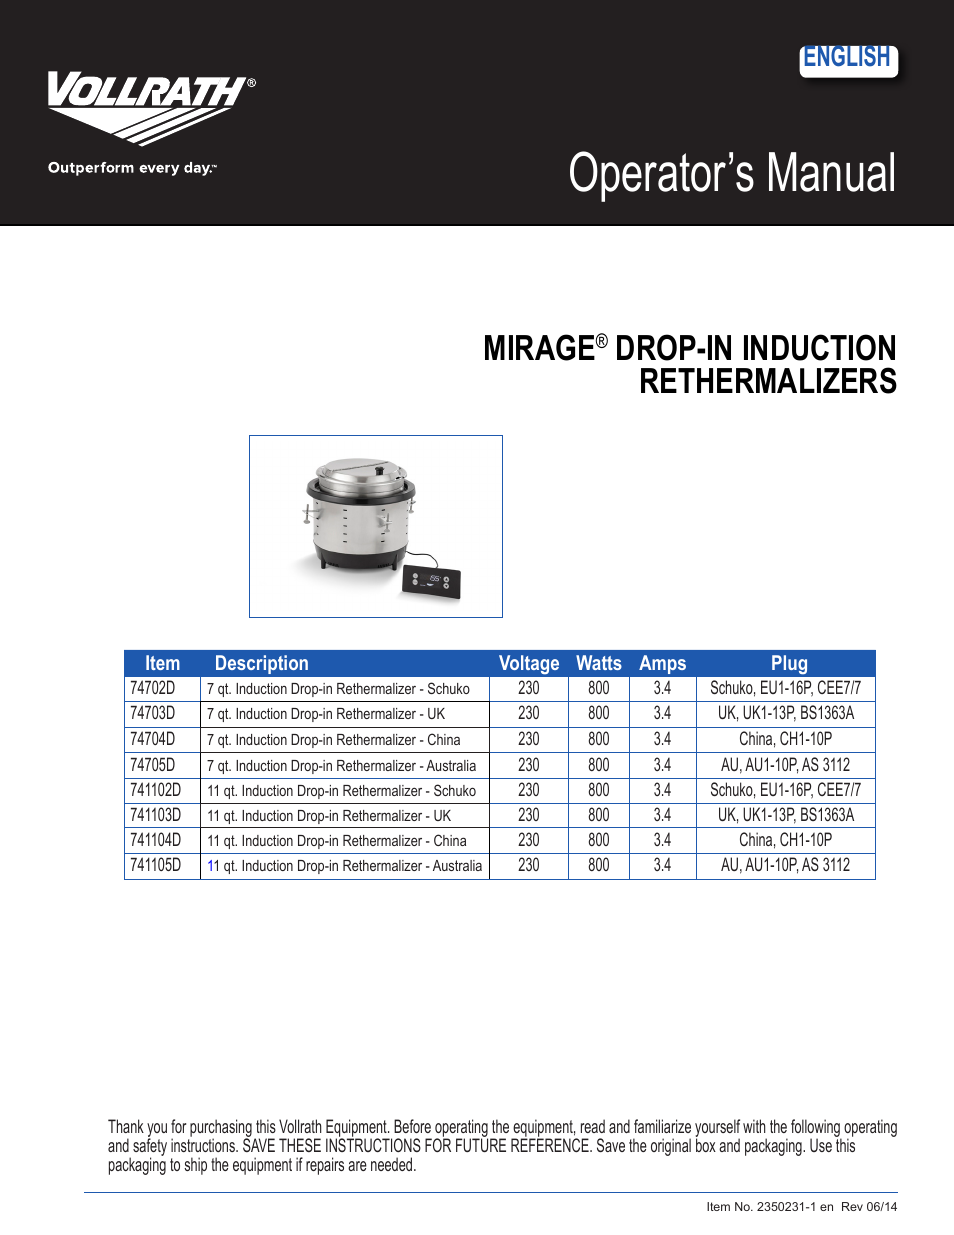 Mirage Drop-In Induction Rethermalizer 11 Qt